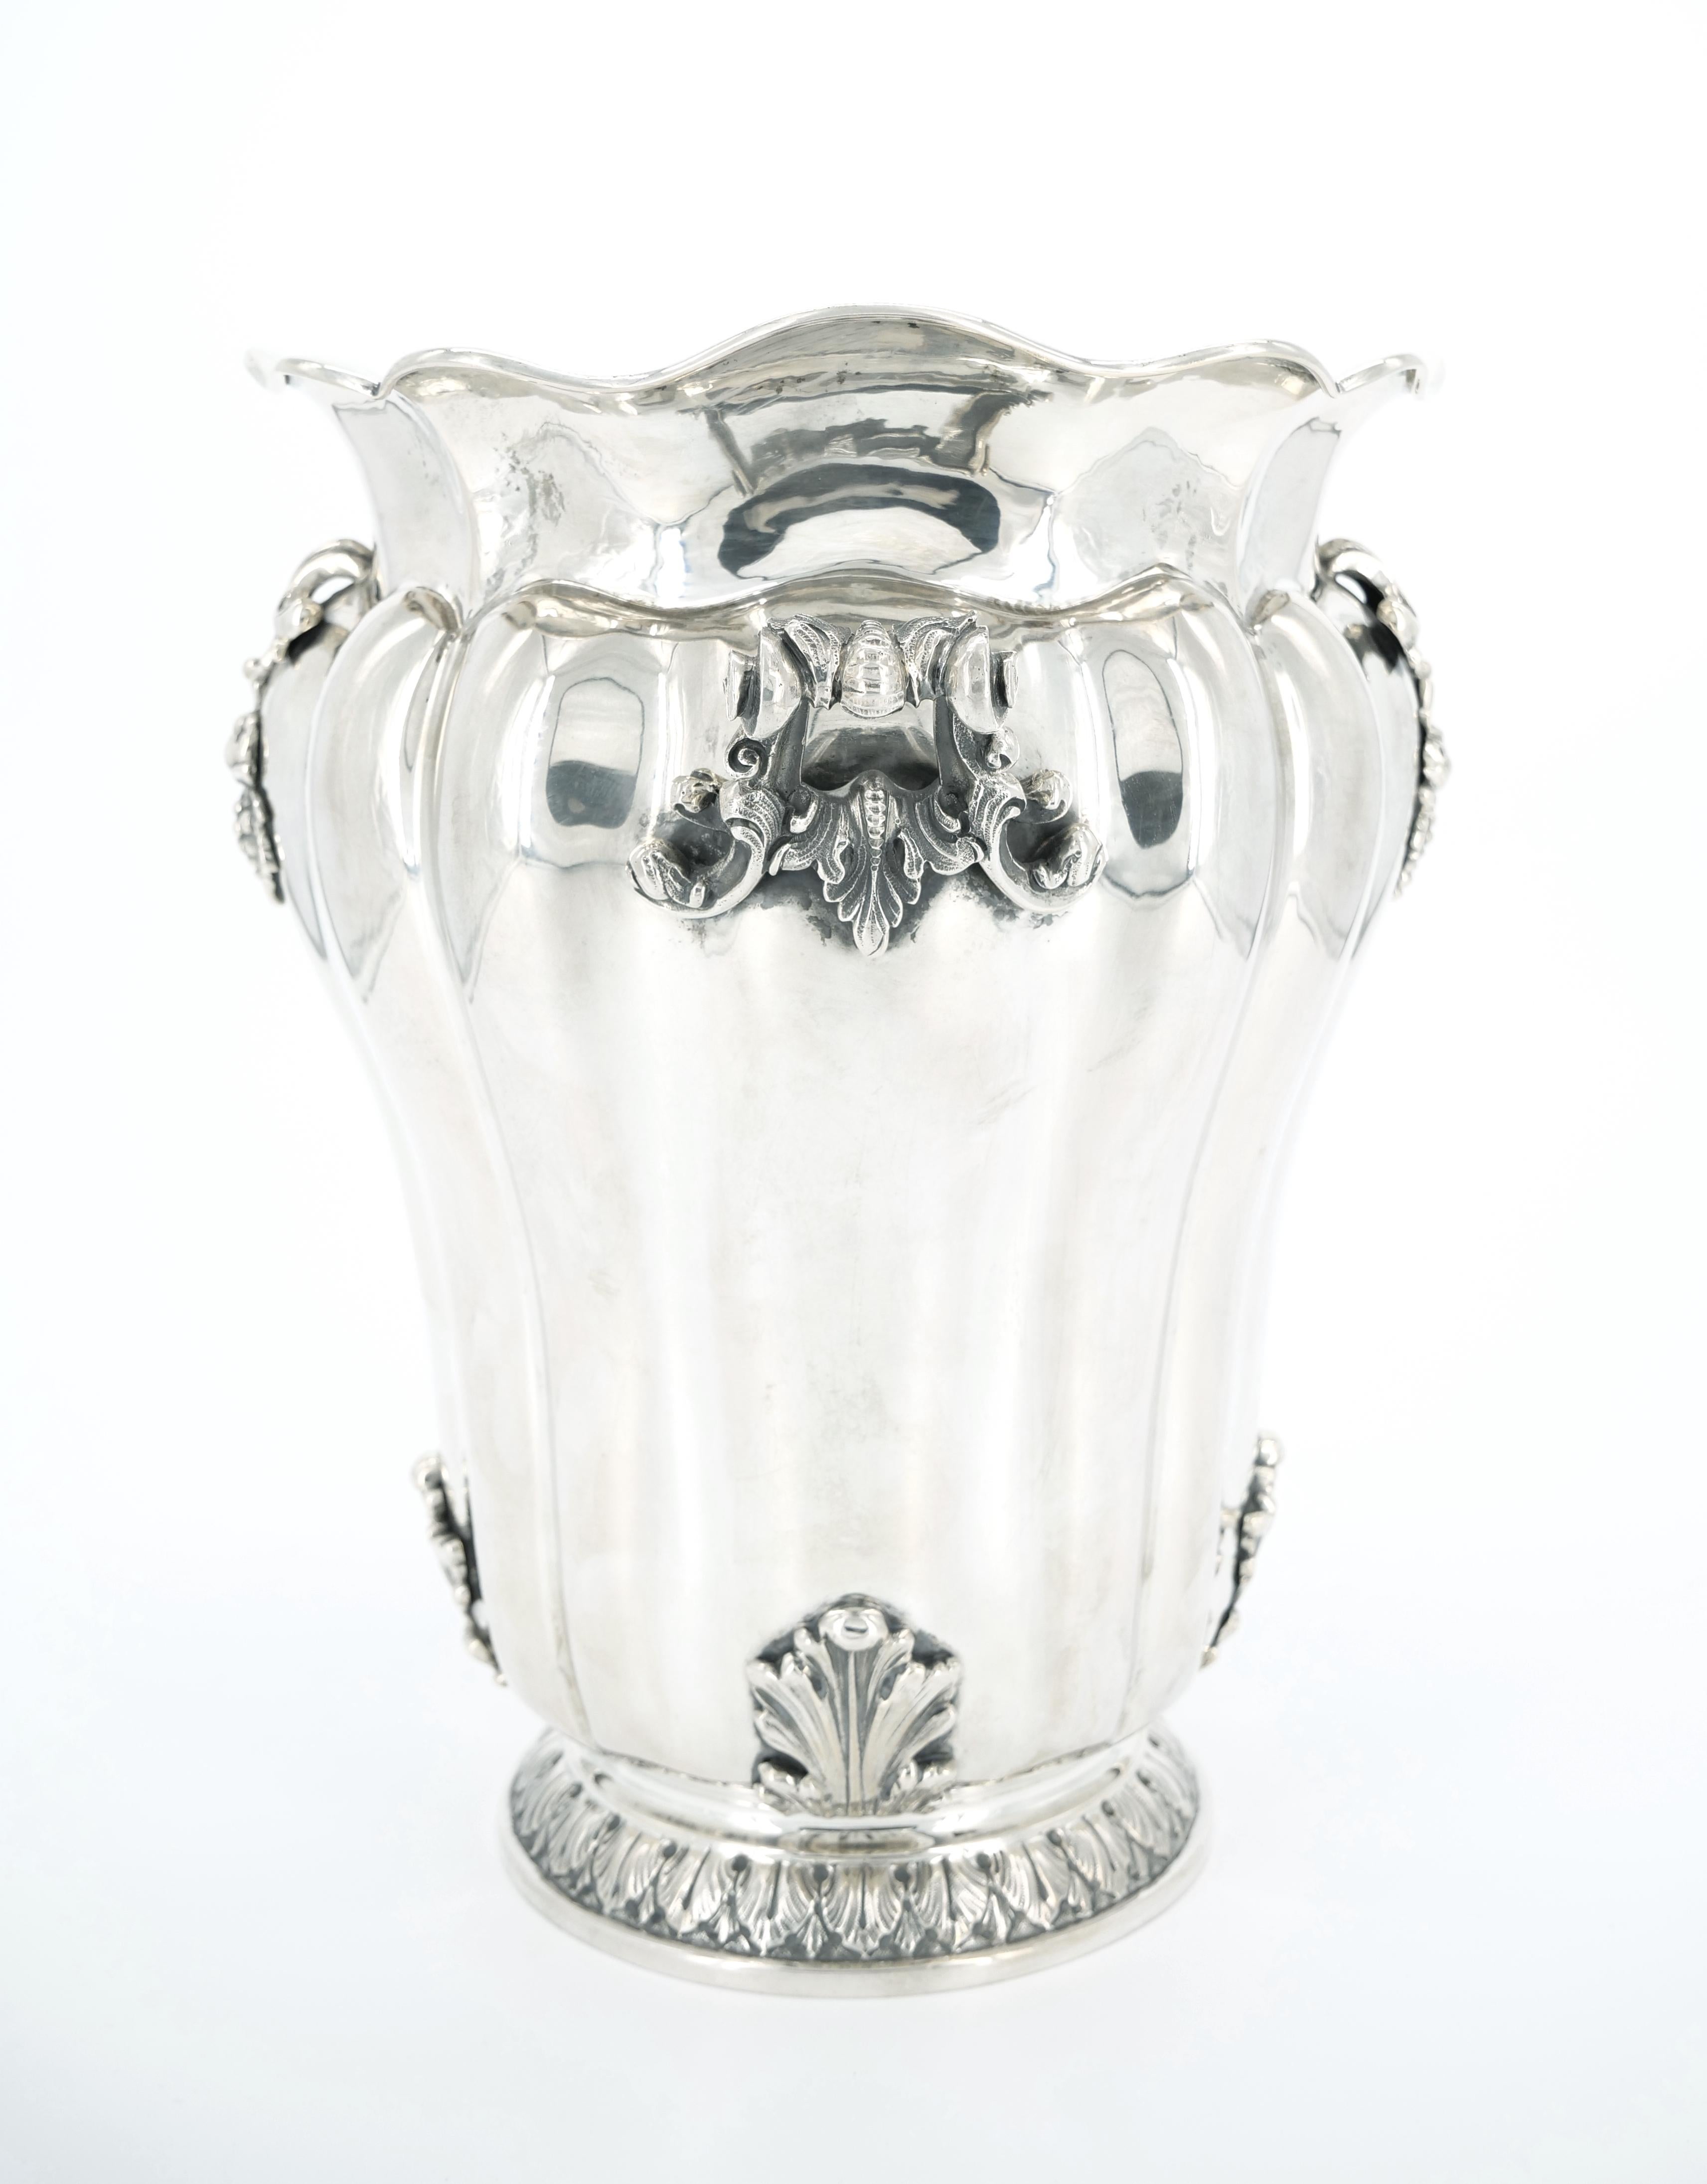 Transport yourself to the opulence of the 19th century with this Italian Sterling Silver Barware/Tableware Wine Cooler or Ice Bucket—a true masterpiece in design and craftsmanship. This exceptional cooler boasts an enchanting all-over swirled